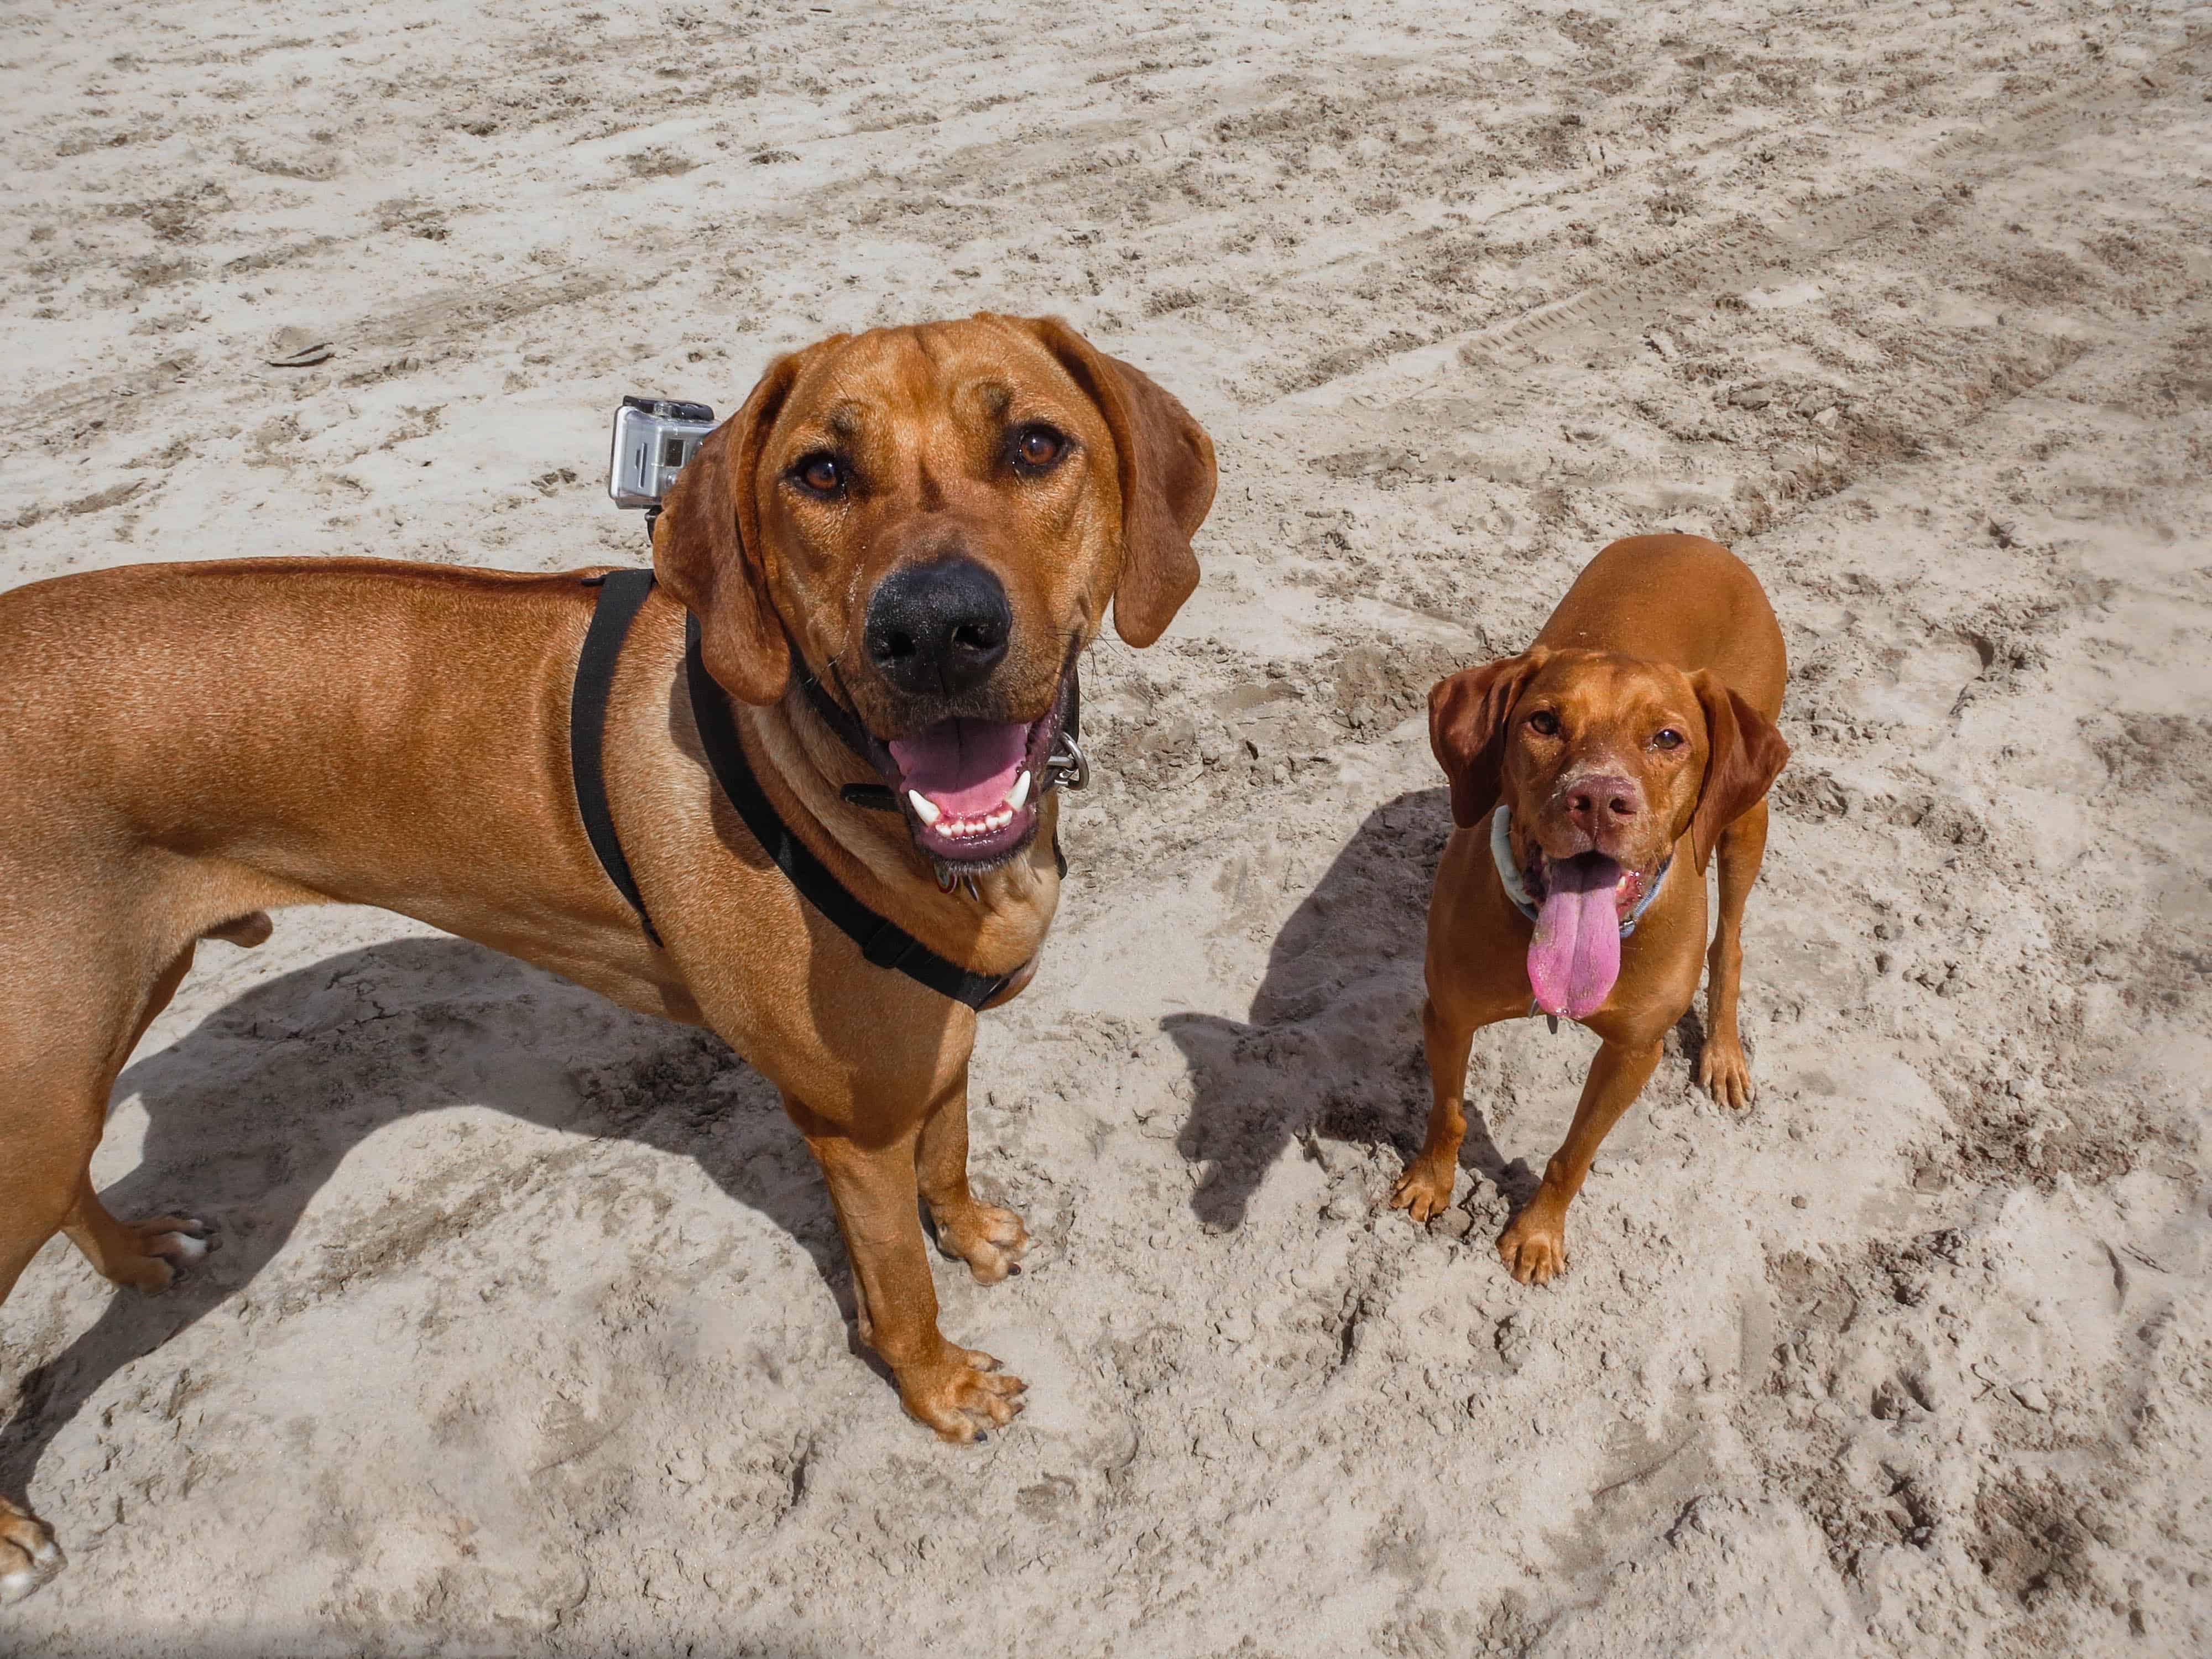 Marking Our Territory, Rhodesian Ridgeback, pet adventure, dog blog, pet photos, things to do with your dog